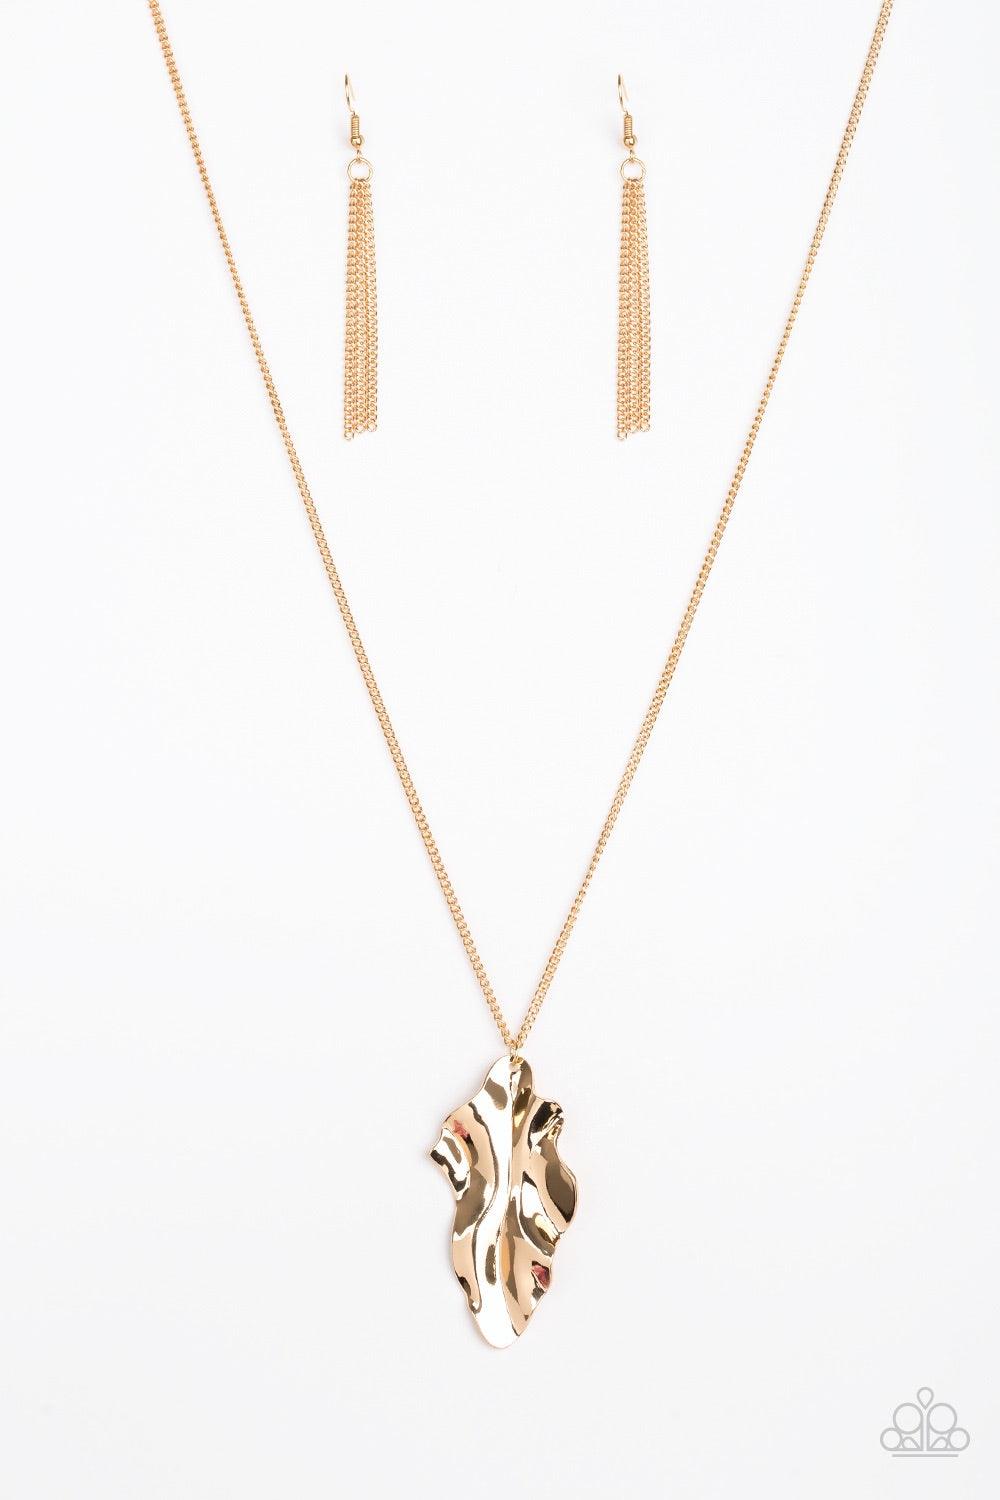 Paparazzi Accessories Fiercely Fall - Gold An elongated gold chain gives way to a rippling gold leaf-like pendant for a seasonal look. Features an adjustable clasp closure. Jewelry